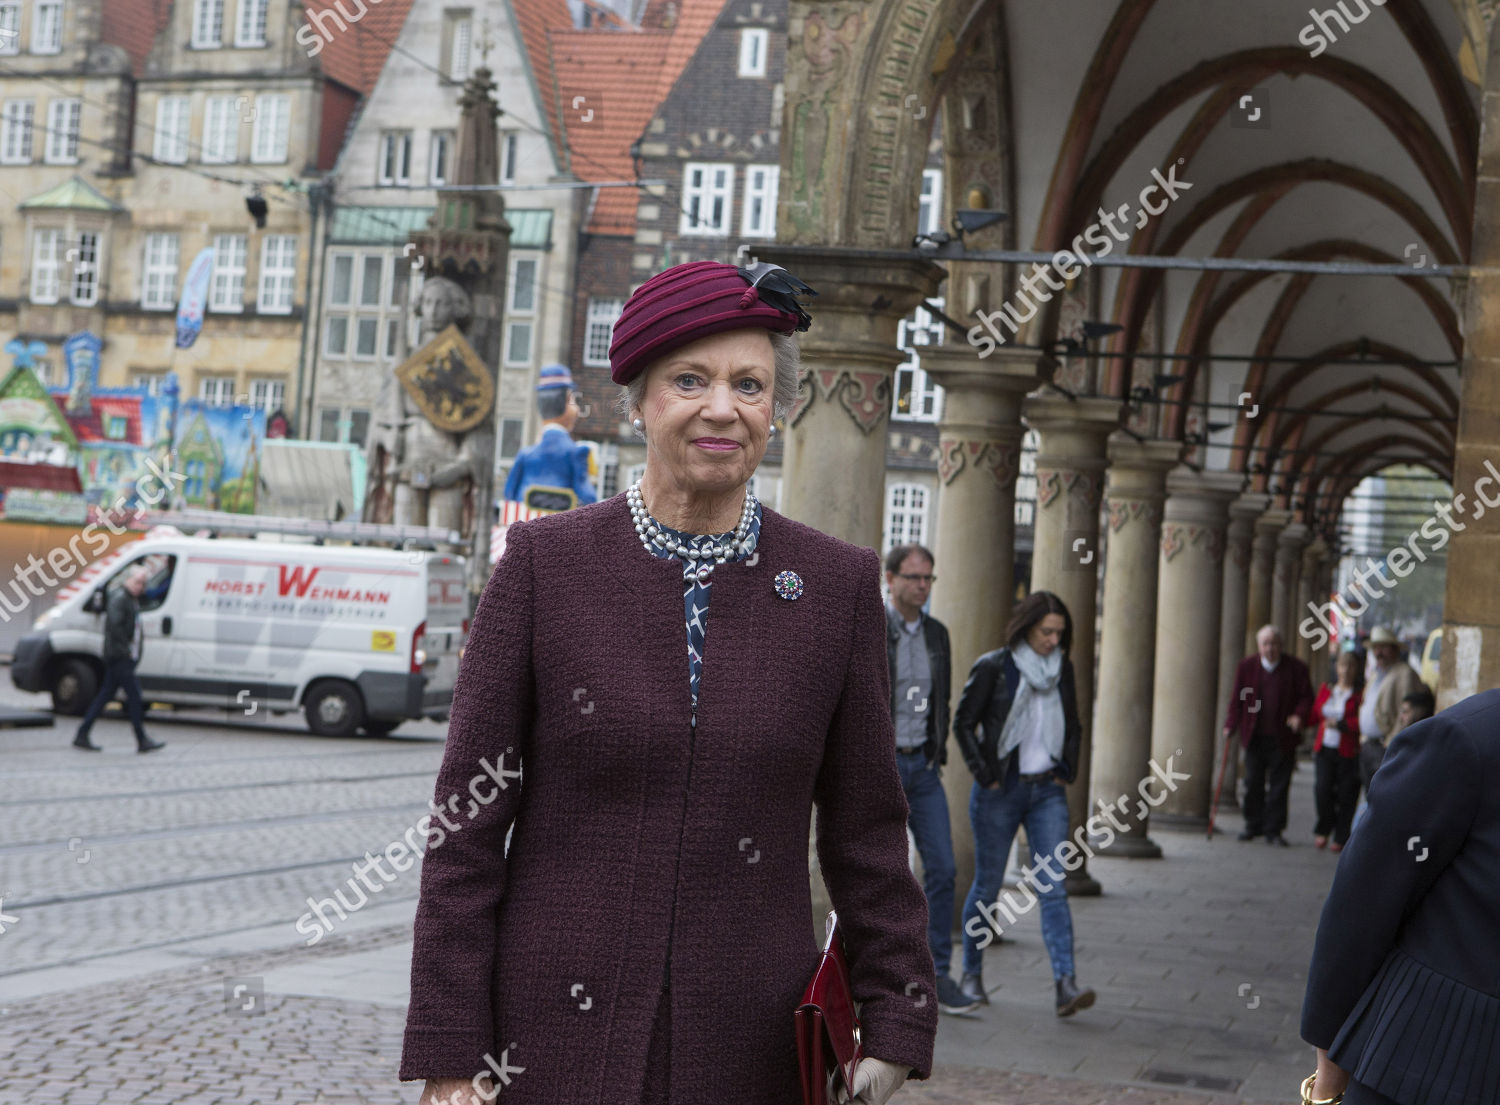 princess-benedikte-of-denmark-signs-the-golden-book-of-the-city-of-bremen-on-the-occasion-of-the-150th-anniversary-of-the-danish-honorary-consulate-bremen-germany-shutterstock-editorial-9937265k.jpg